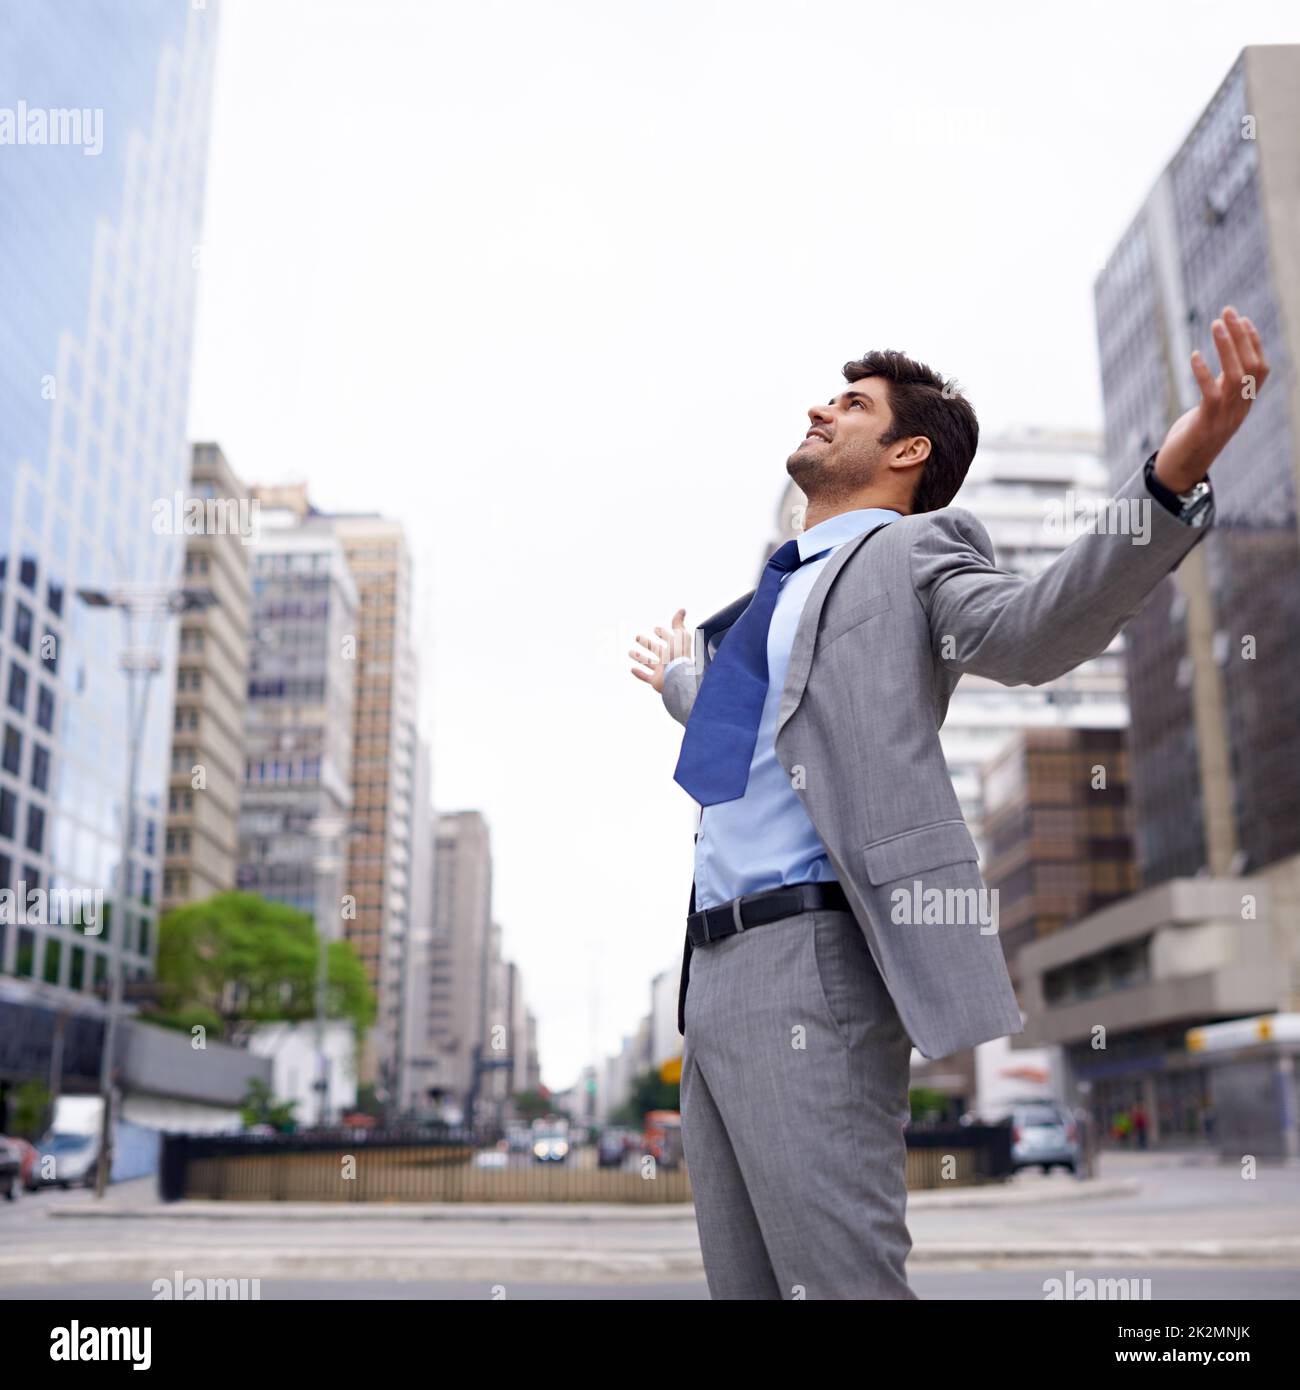 A love for the city. A contented young businessman standing in the city with his eyes closed and his arms raised. Stock Photo